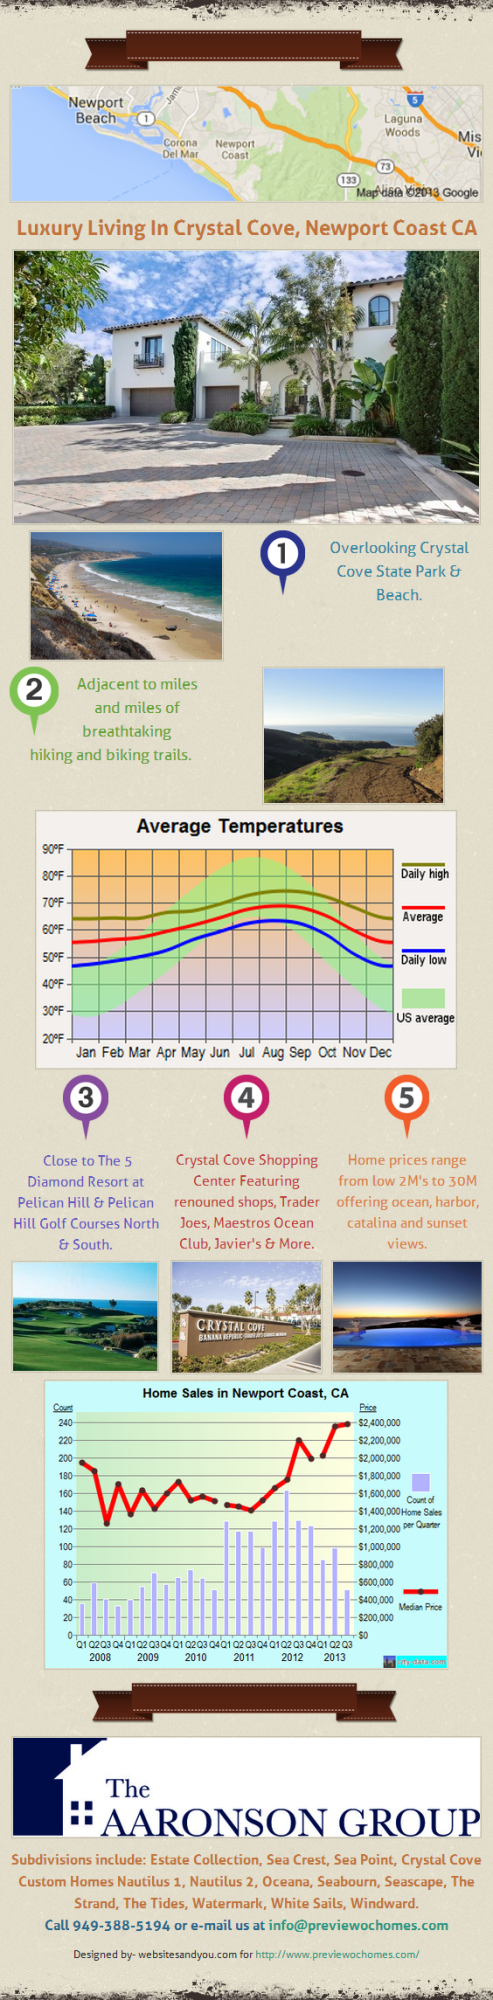 Crystal Cove Luxury Living Infographic